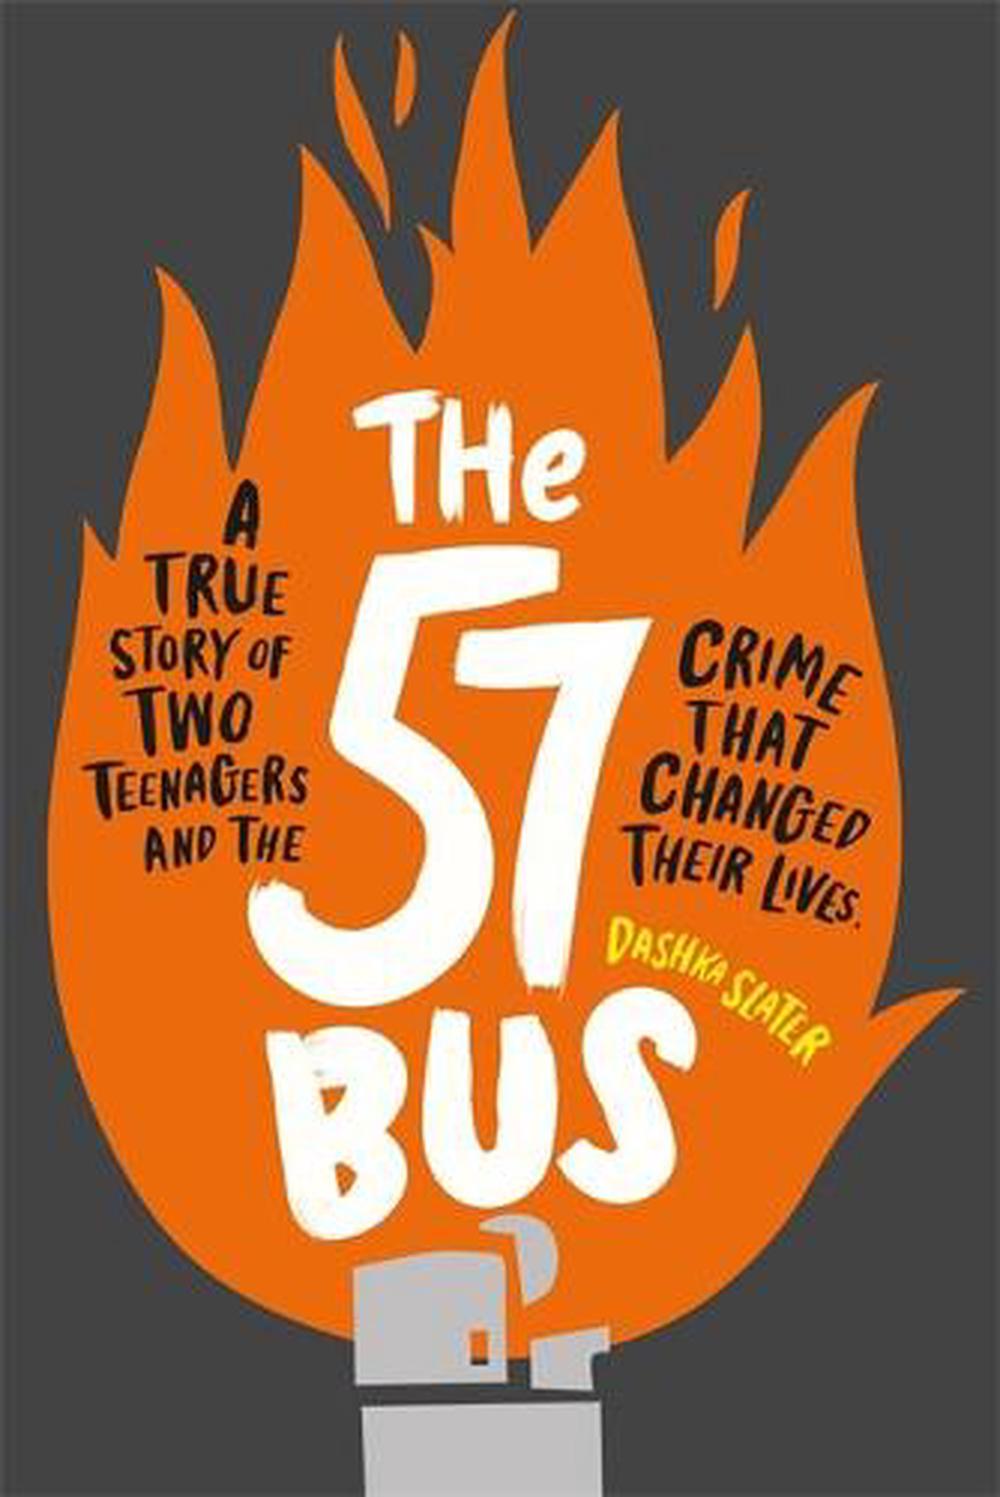 book review on the 57 bus